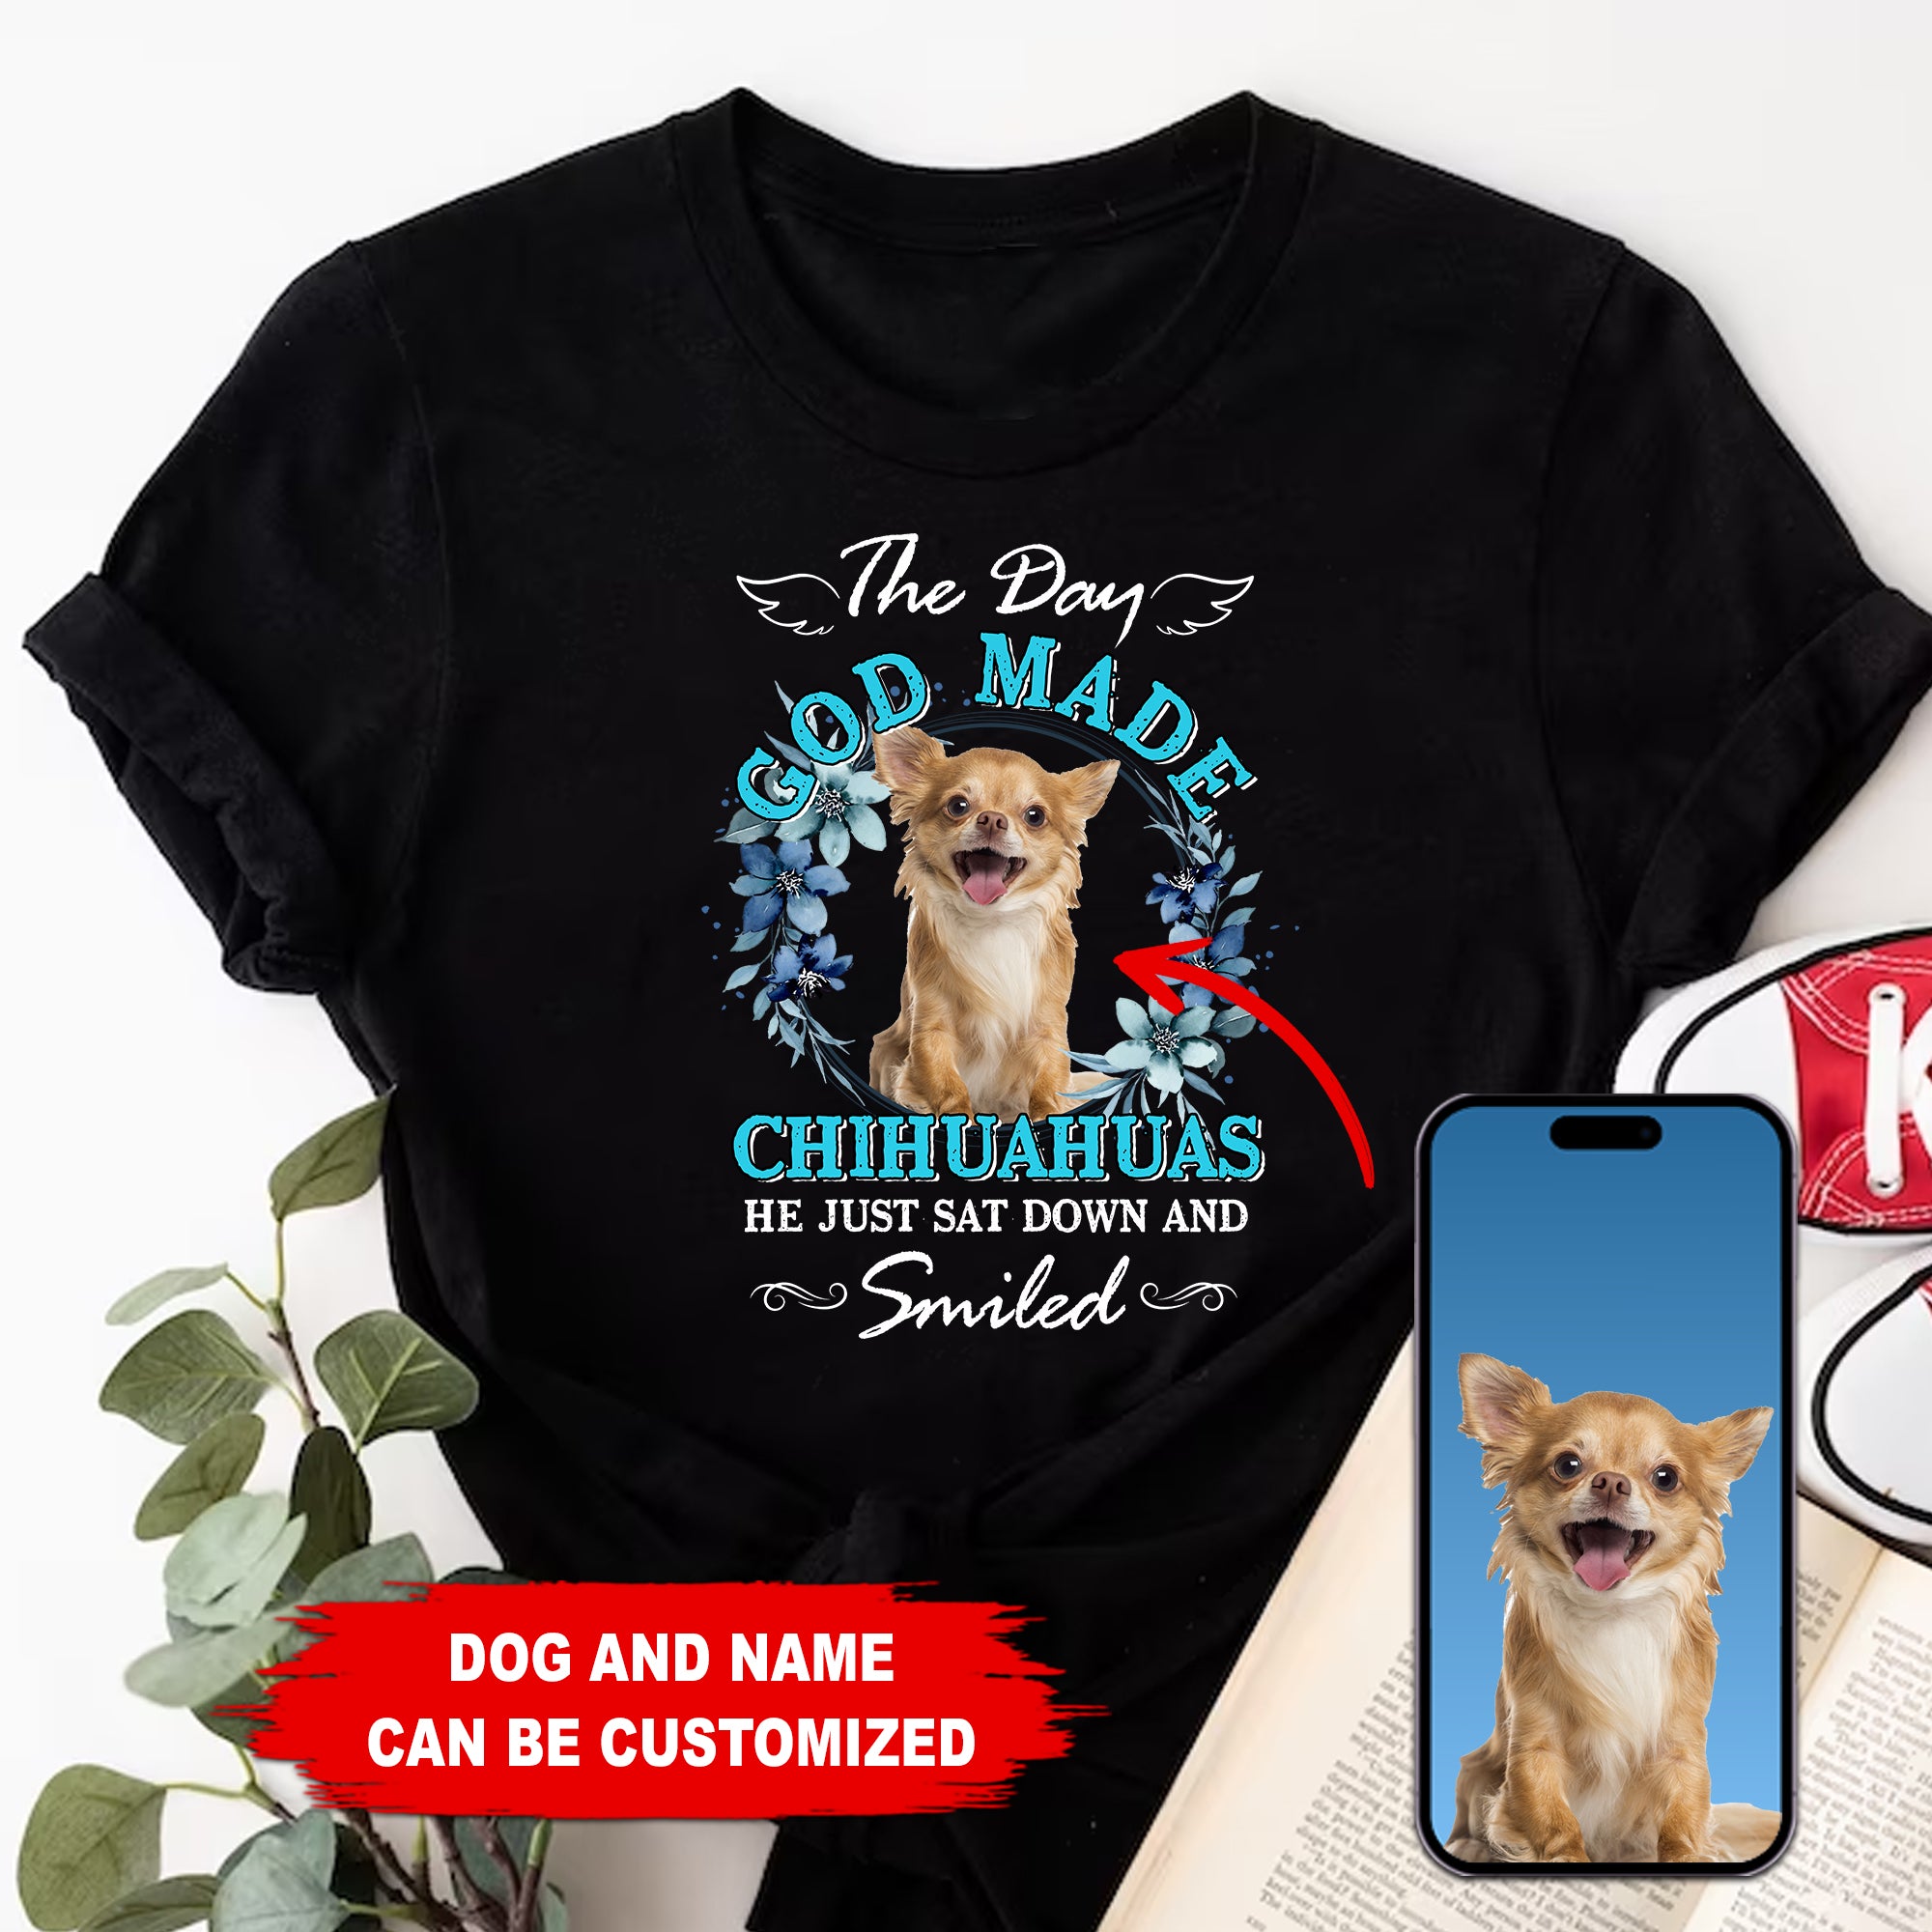 The Day God Made Pet, He Just Sat Down And Smiled - Custom Photo And Text - Personalized T-Shirt - Gift For Pet Lover